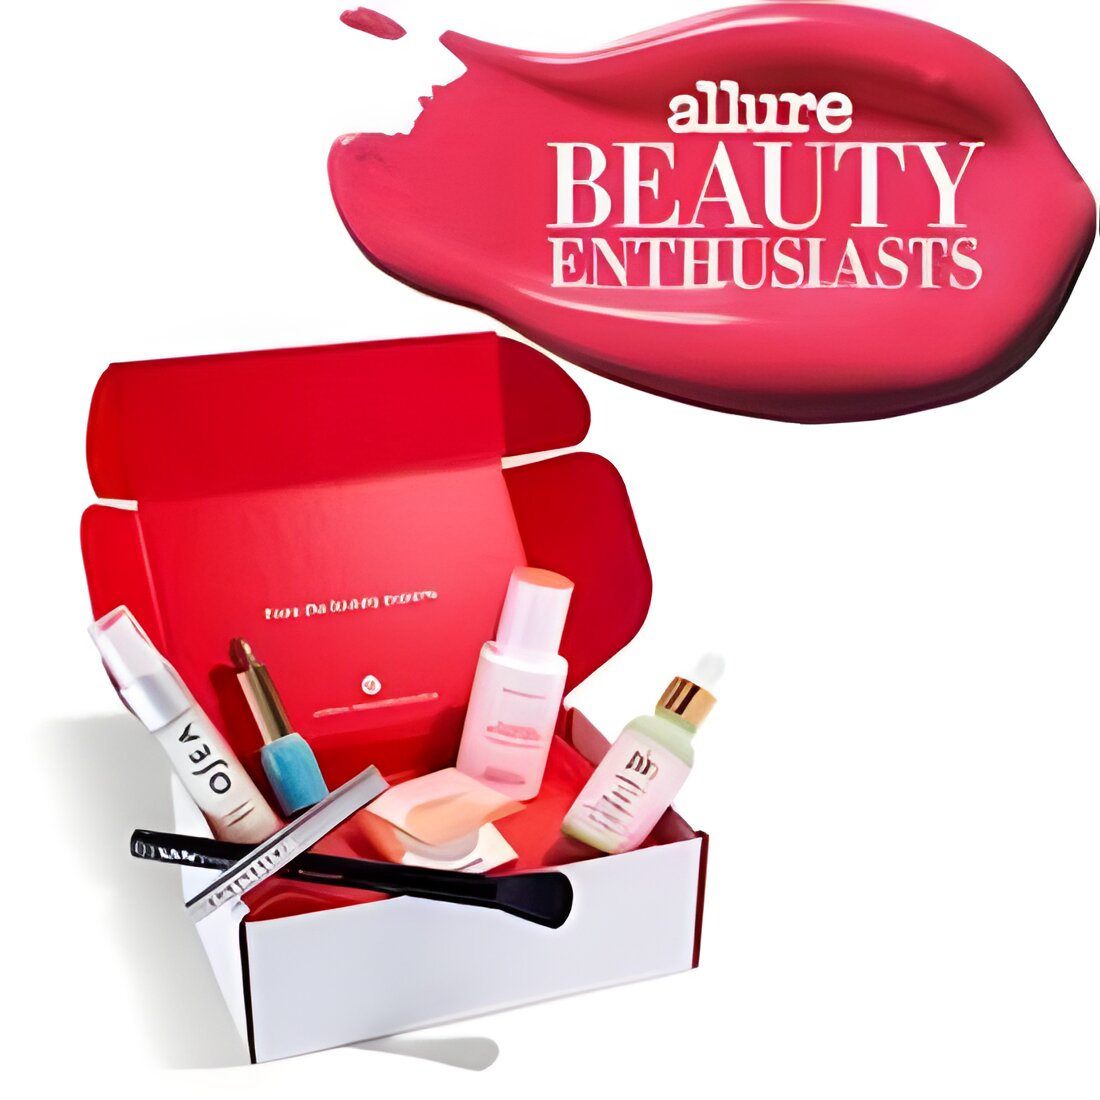 Free Allure Beauty Products